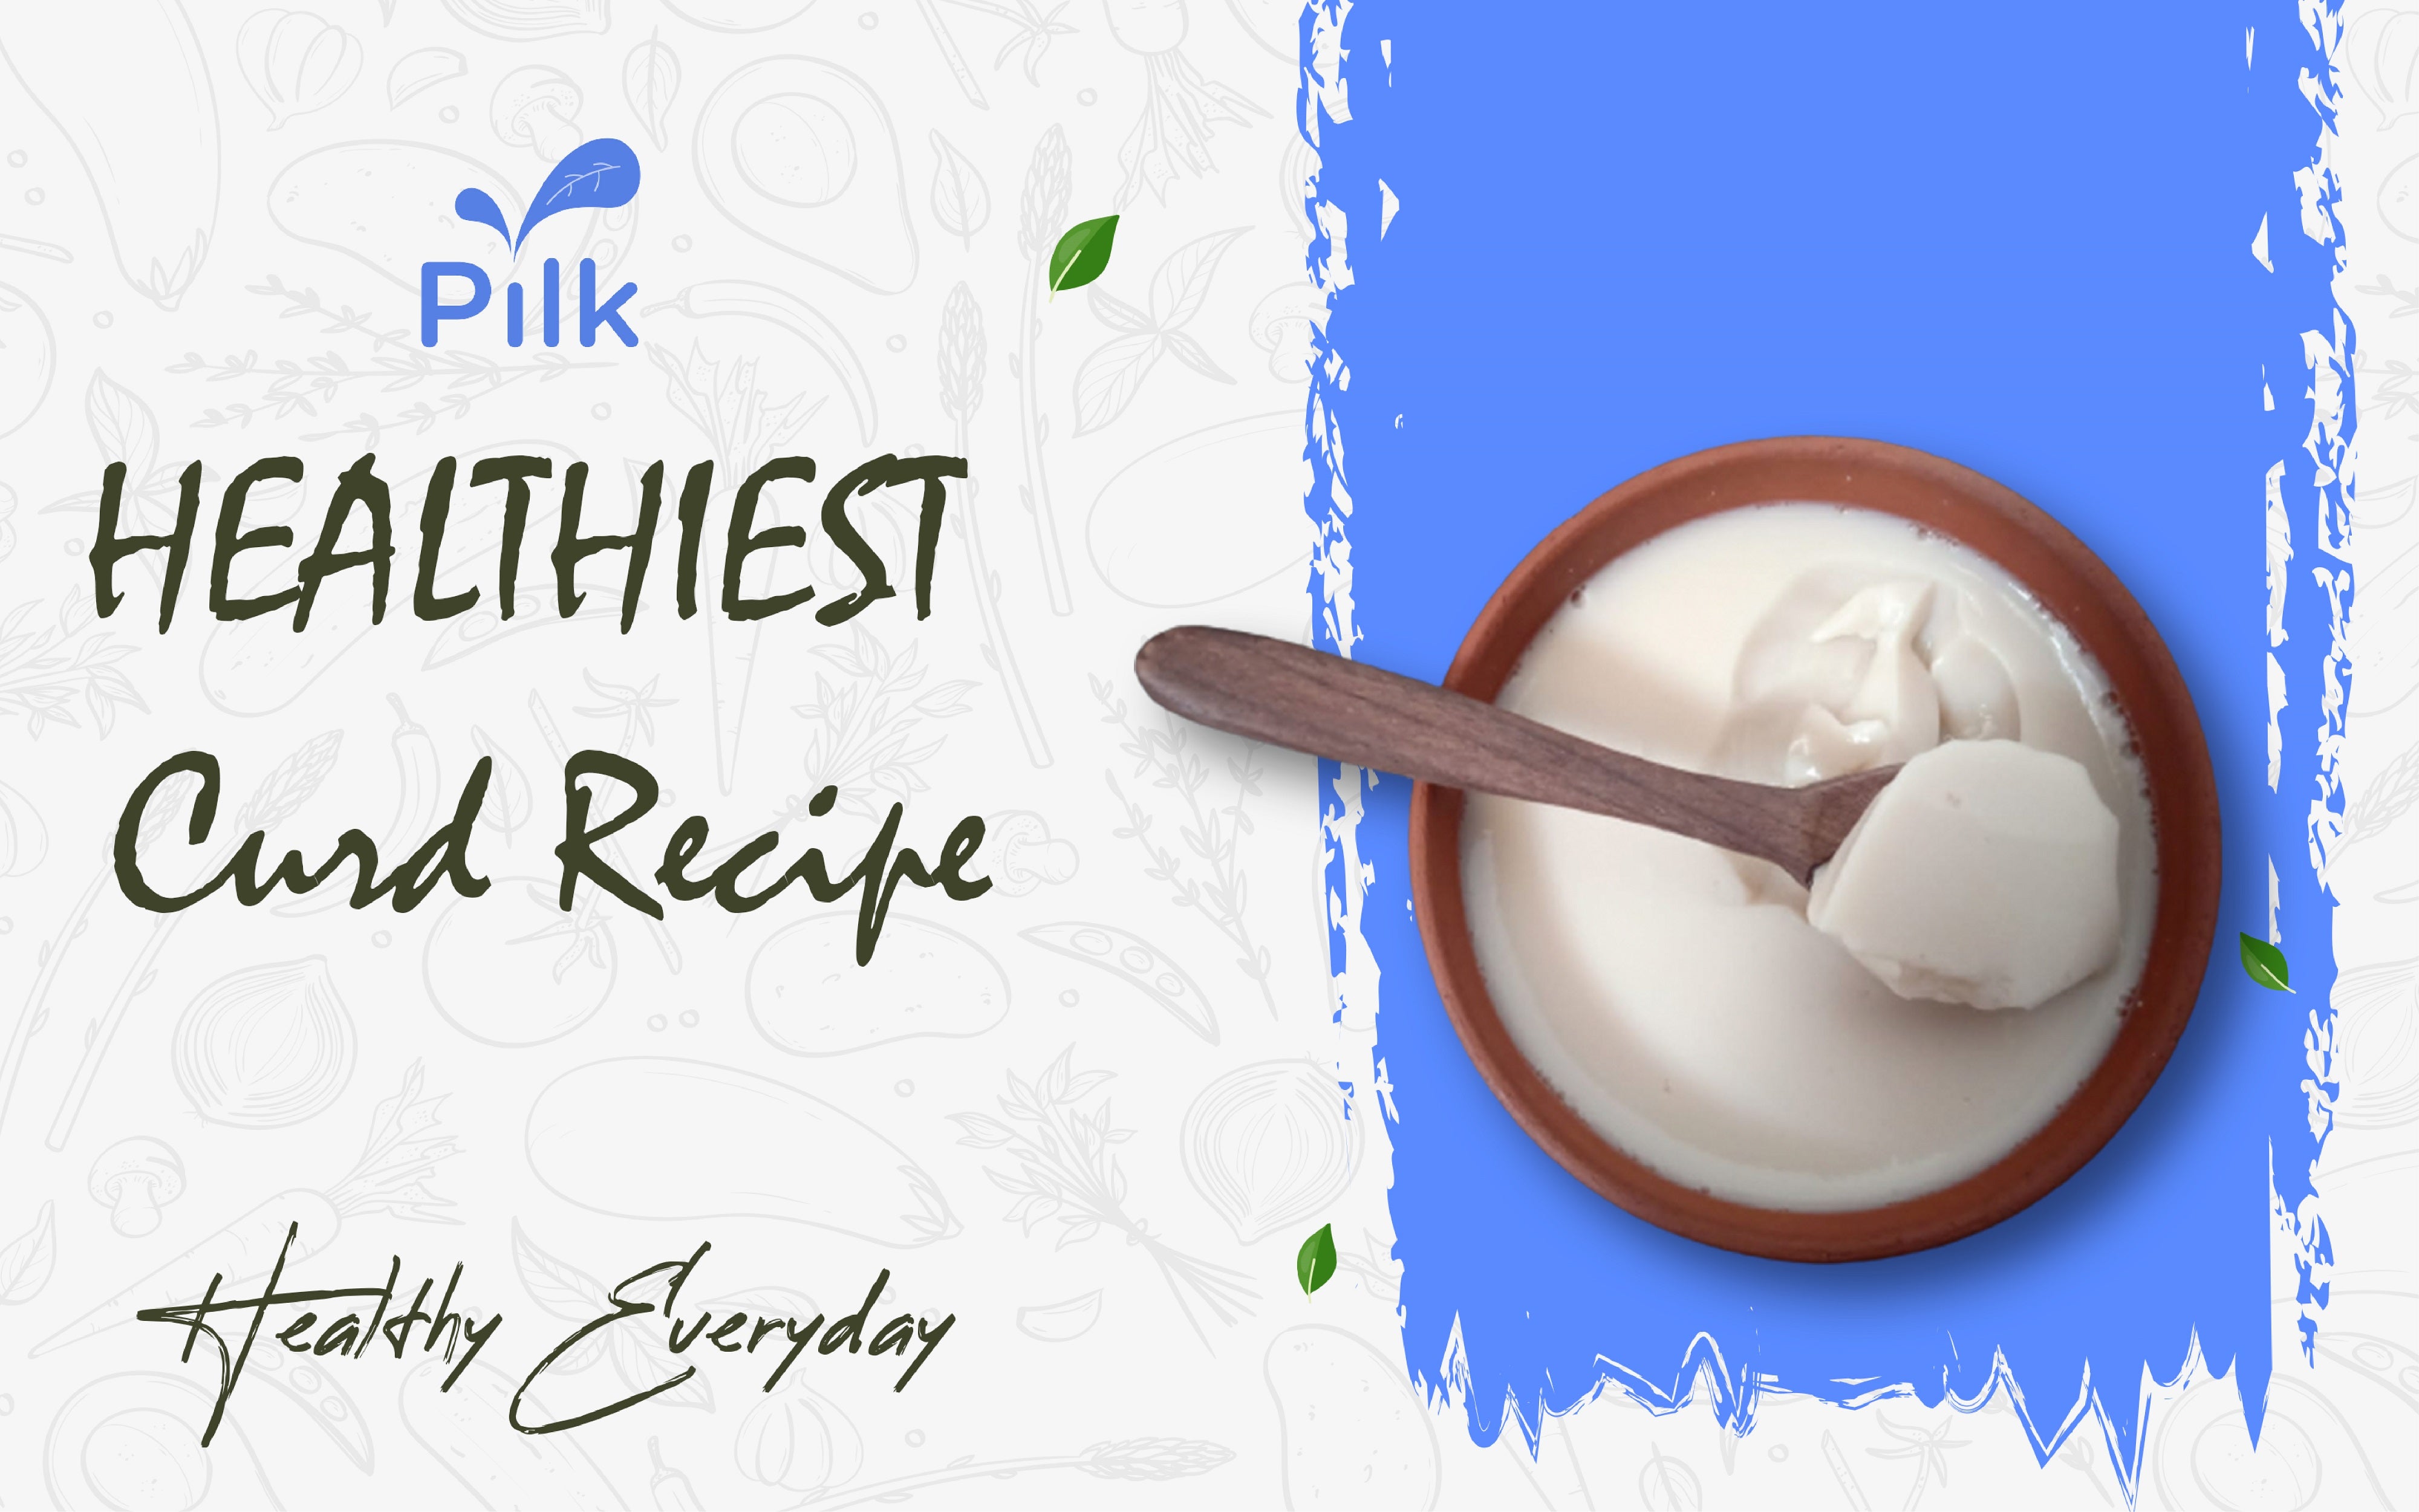 How to make plant based curd?